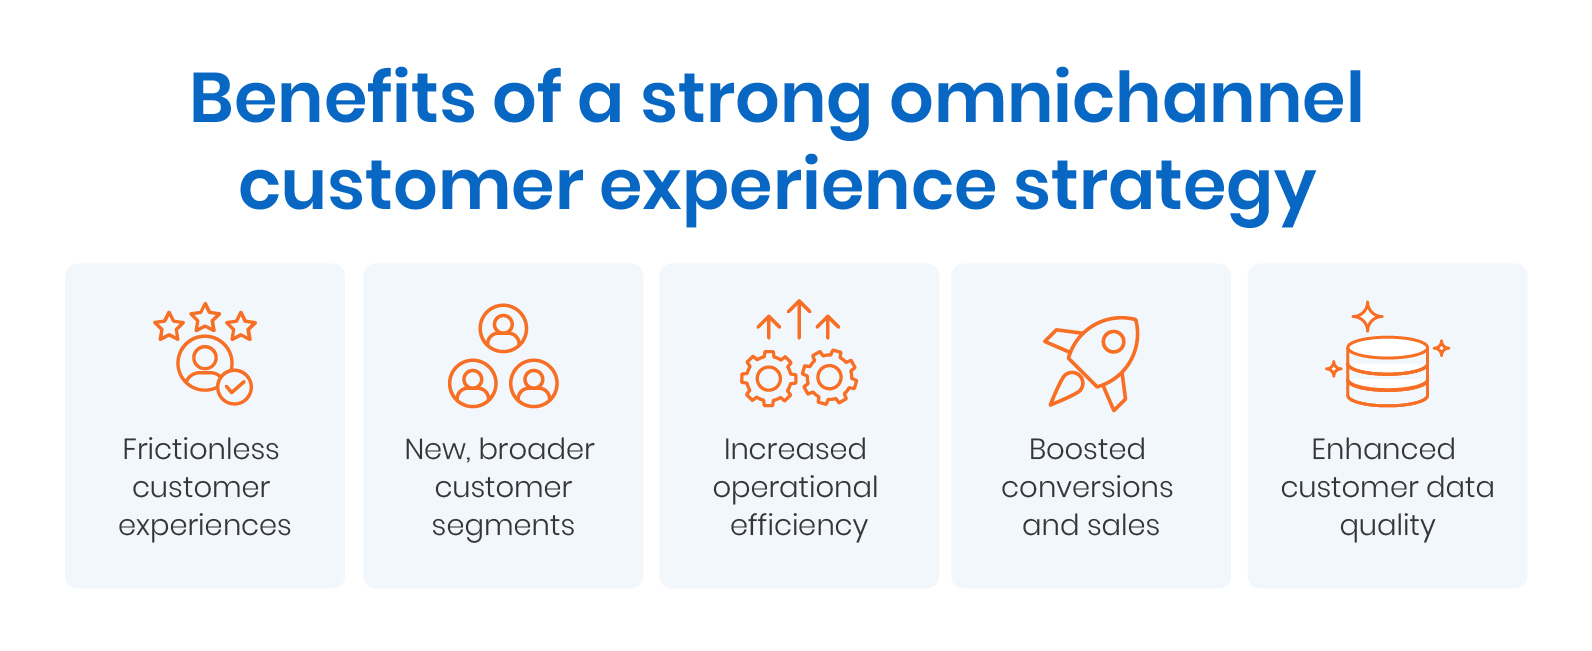 Benefits of a strong omnichannel customer experience strategy